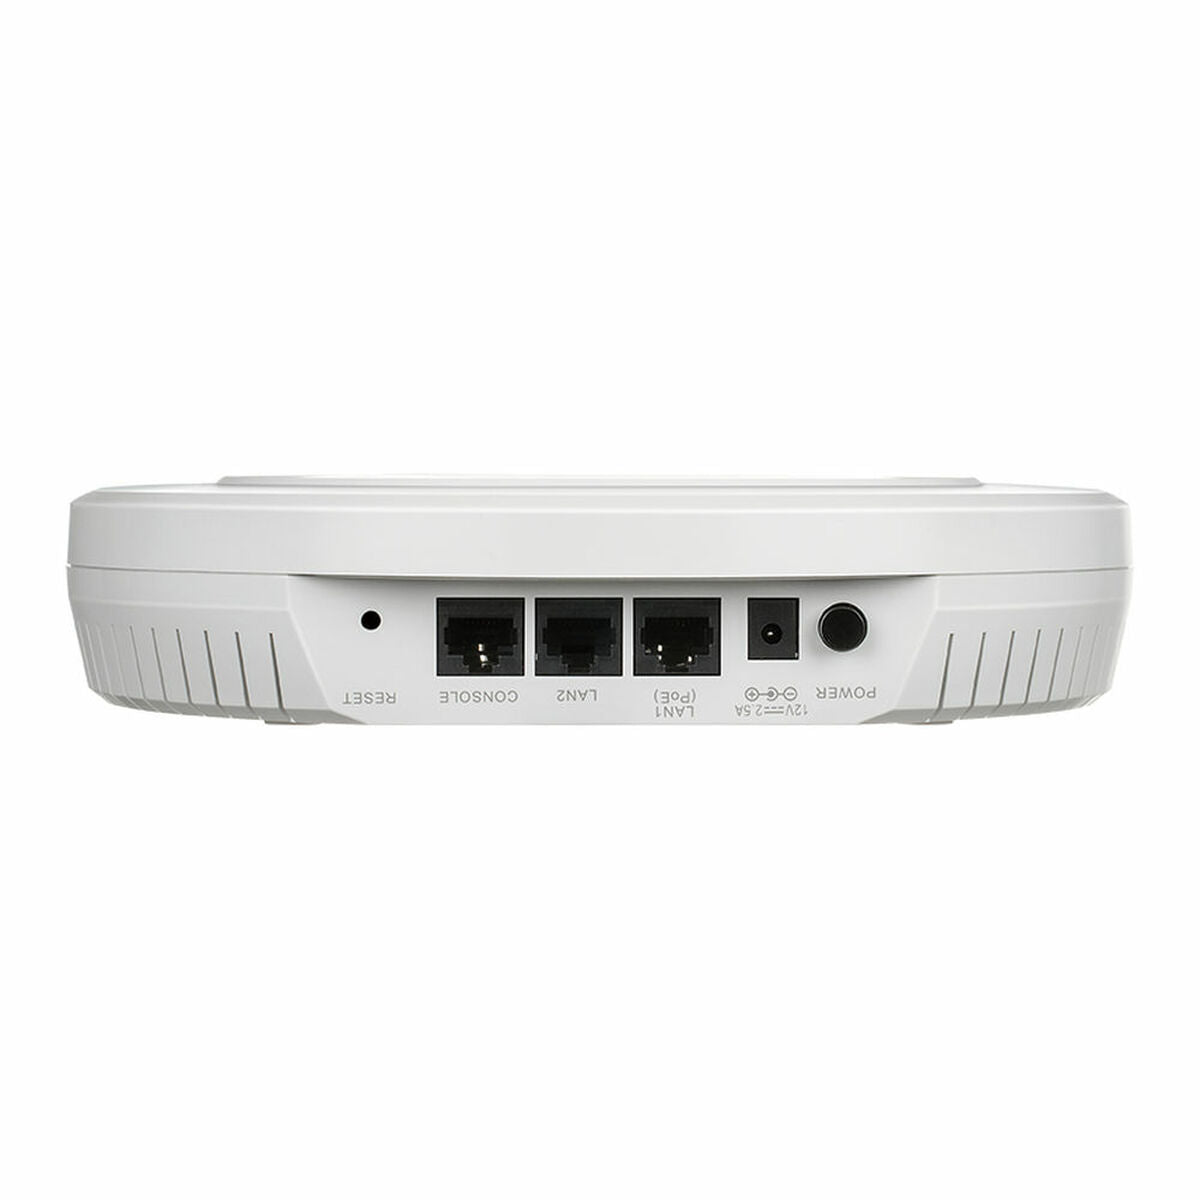 Access point D-Link DWL-8620AP, D-Link, Computing, Network devices, access-point-d-link-dwl-8620ap, Brand_D-Link, category-reference-2609, category-reference-2803, category-reference-2820, category-reference-t-19685, category-reference-t-19914, Condition_NEW, networks/wiring, Price_400 - 500, RiotNook